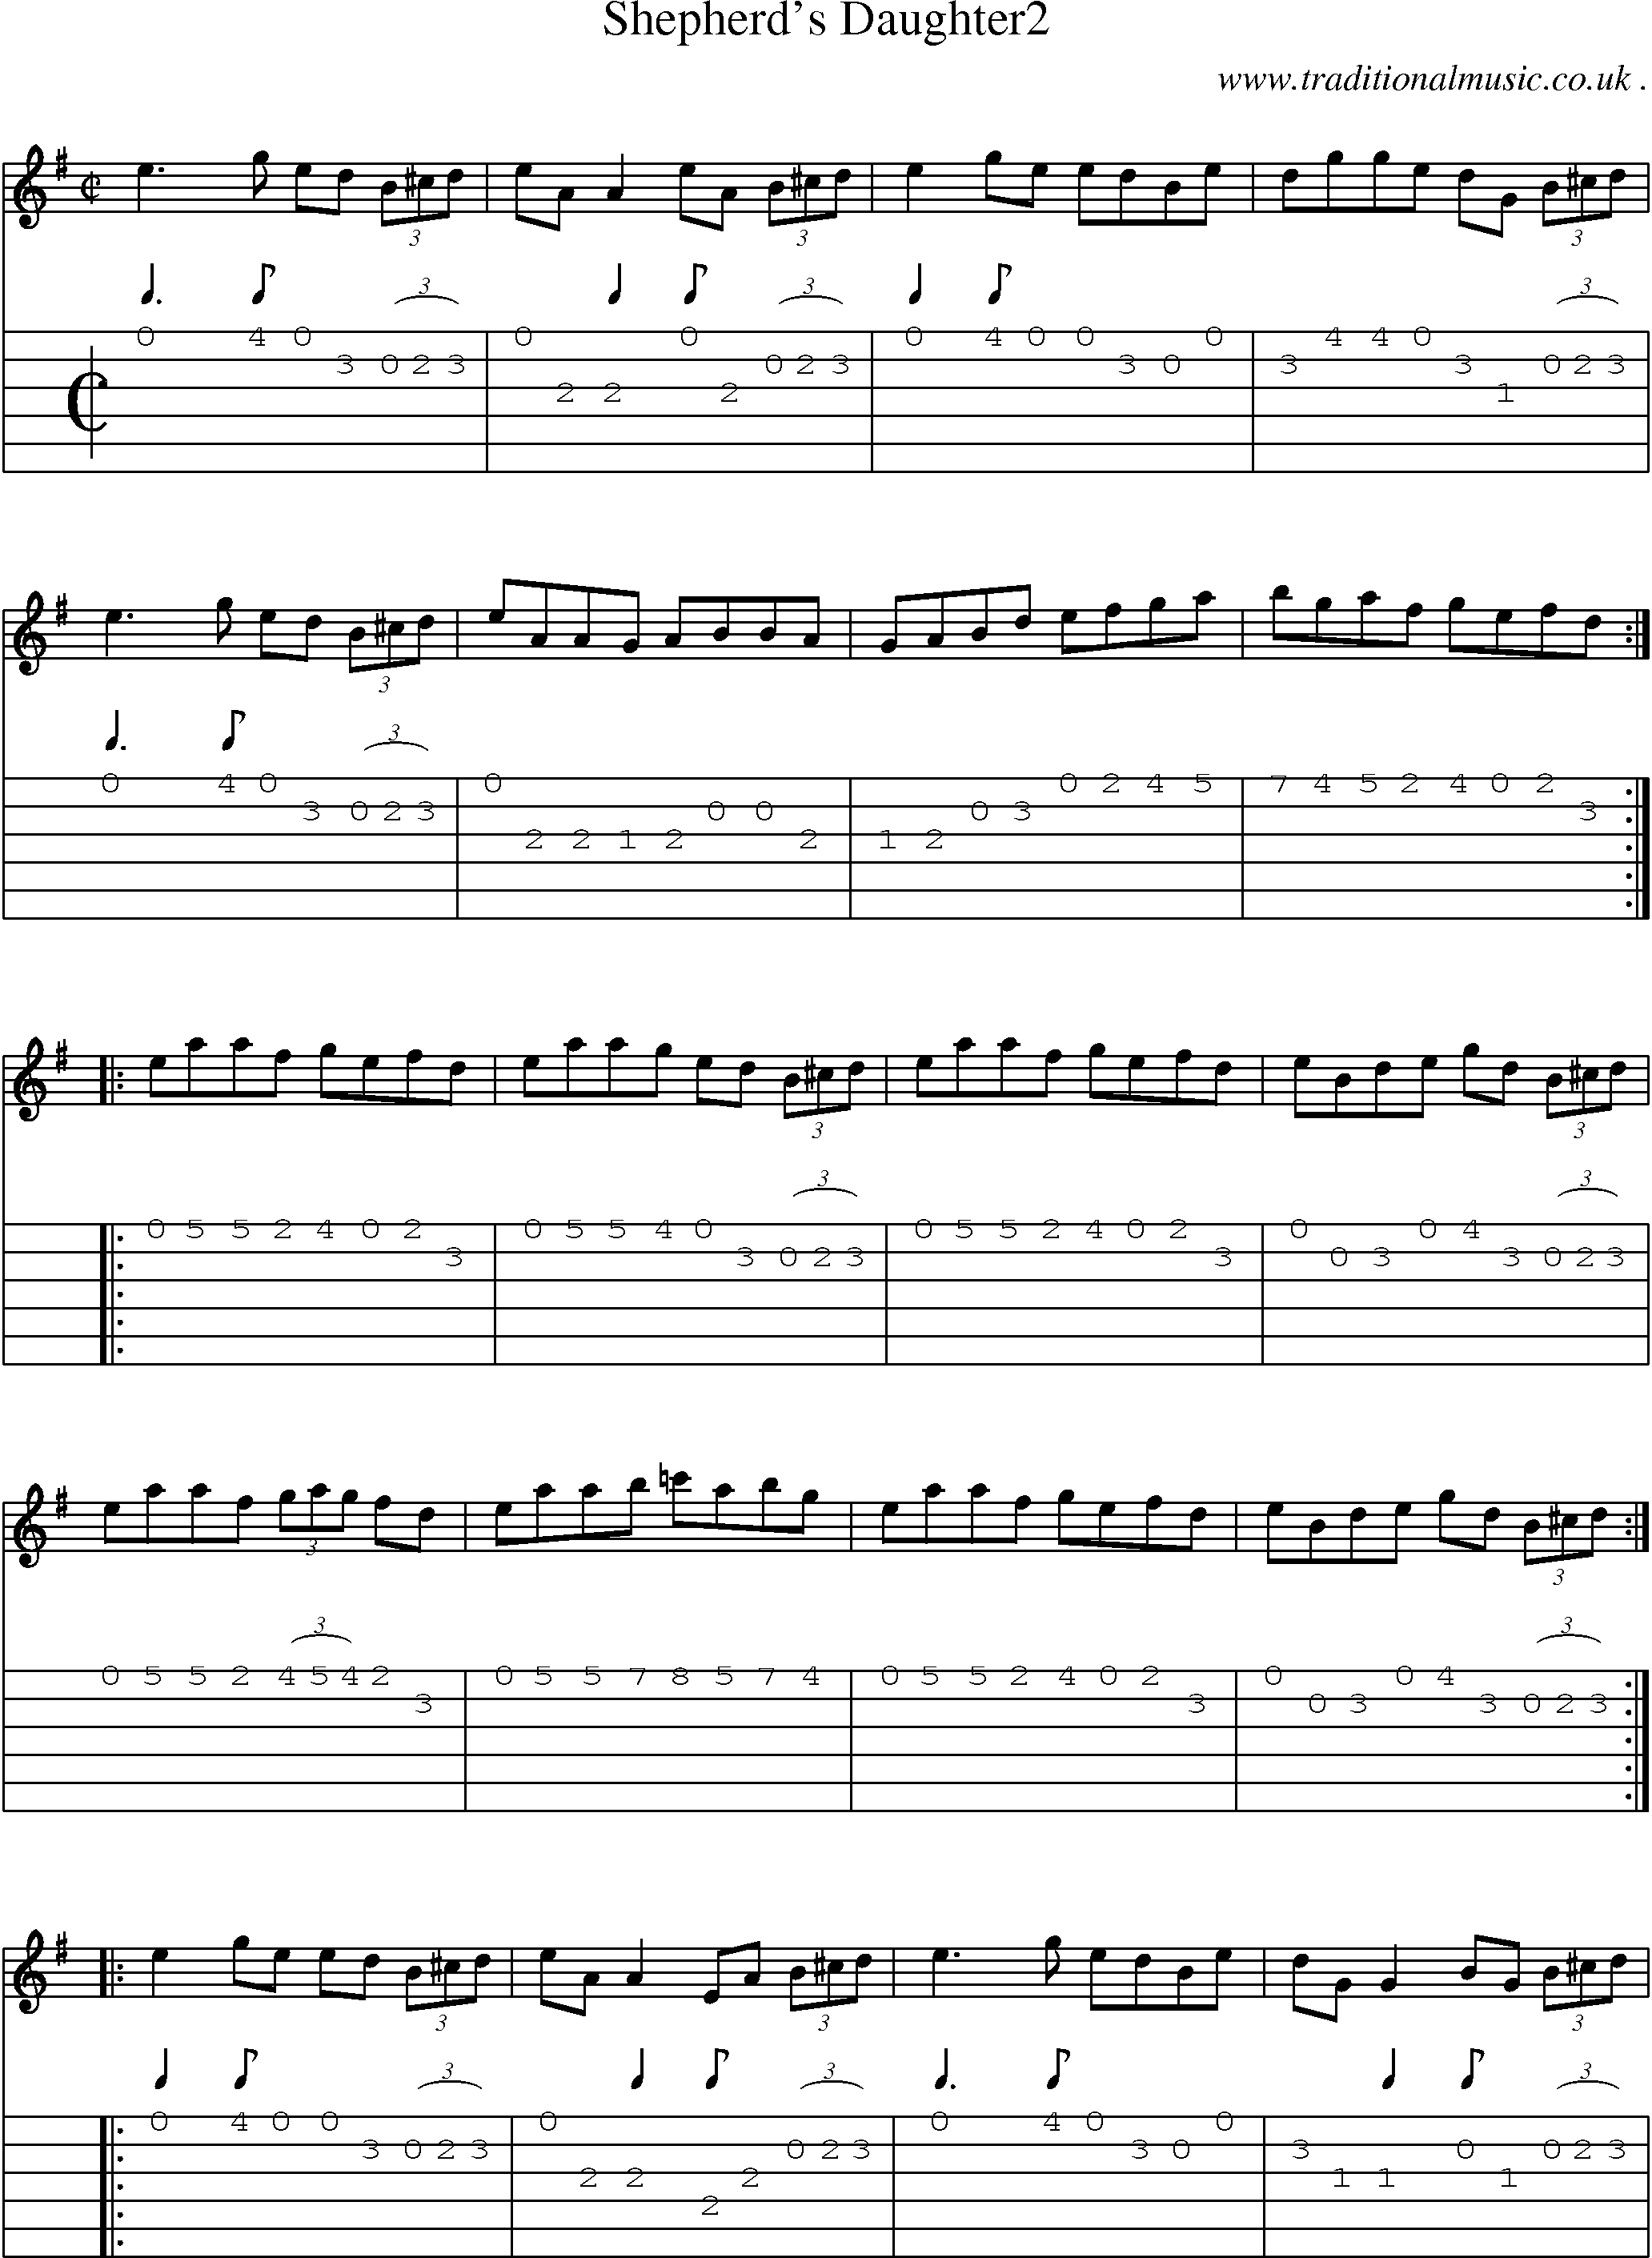 Sheet-Music and Guitar Tabs for Shepherds Daughter2